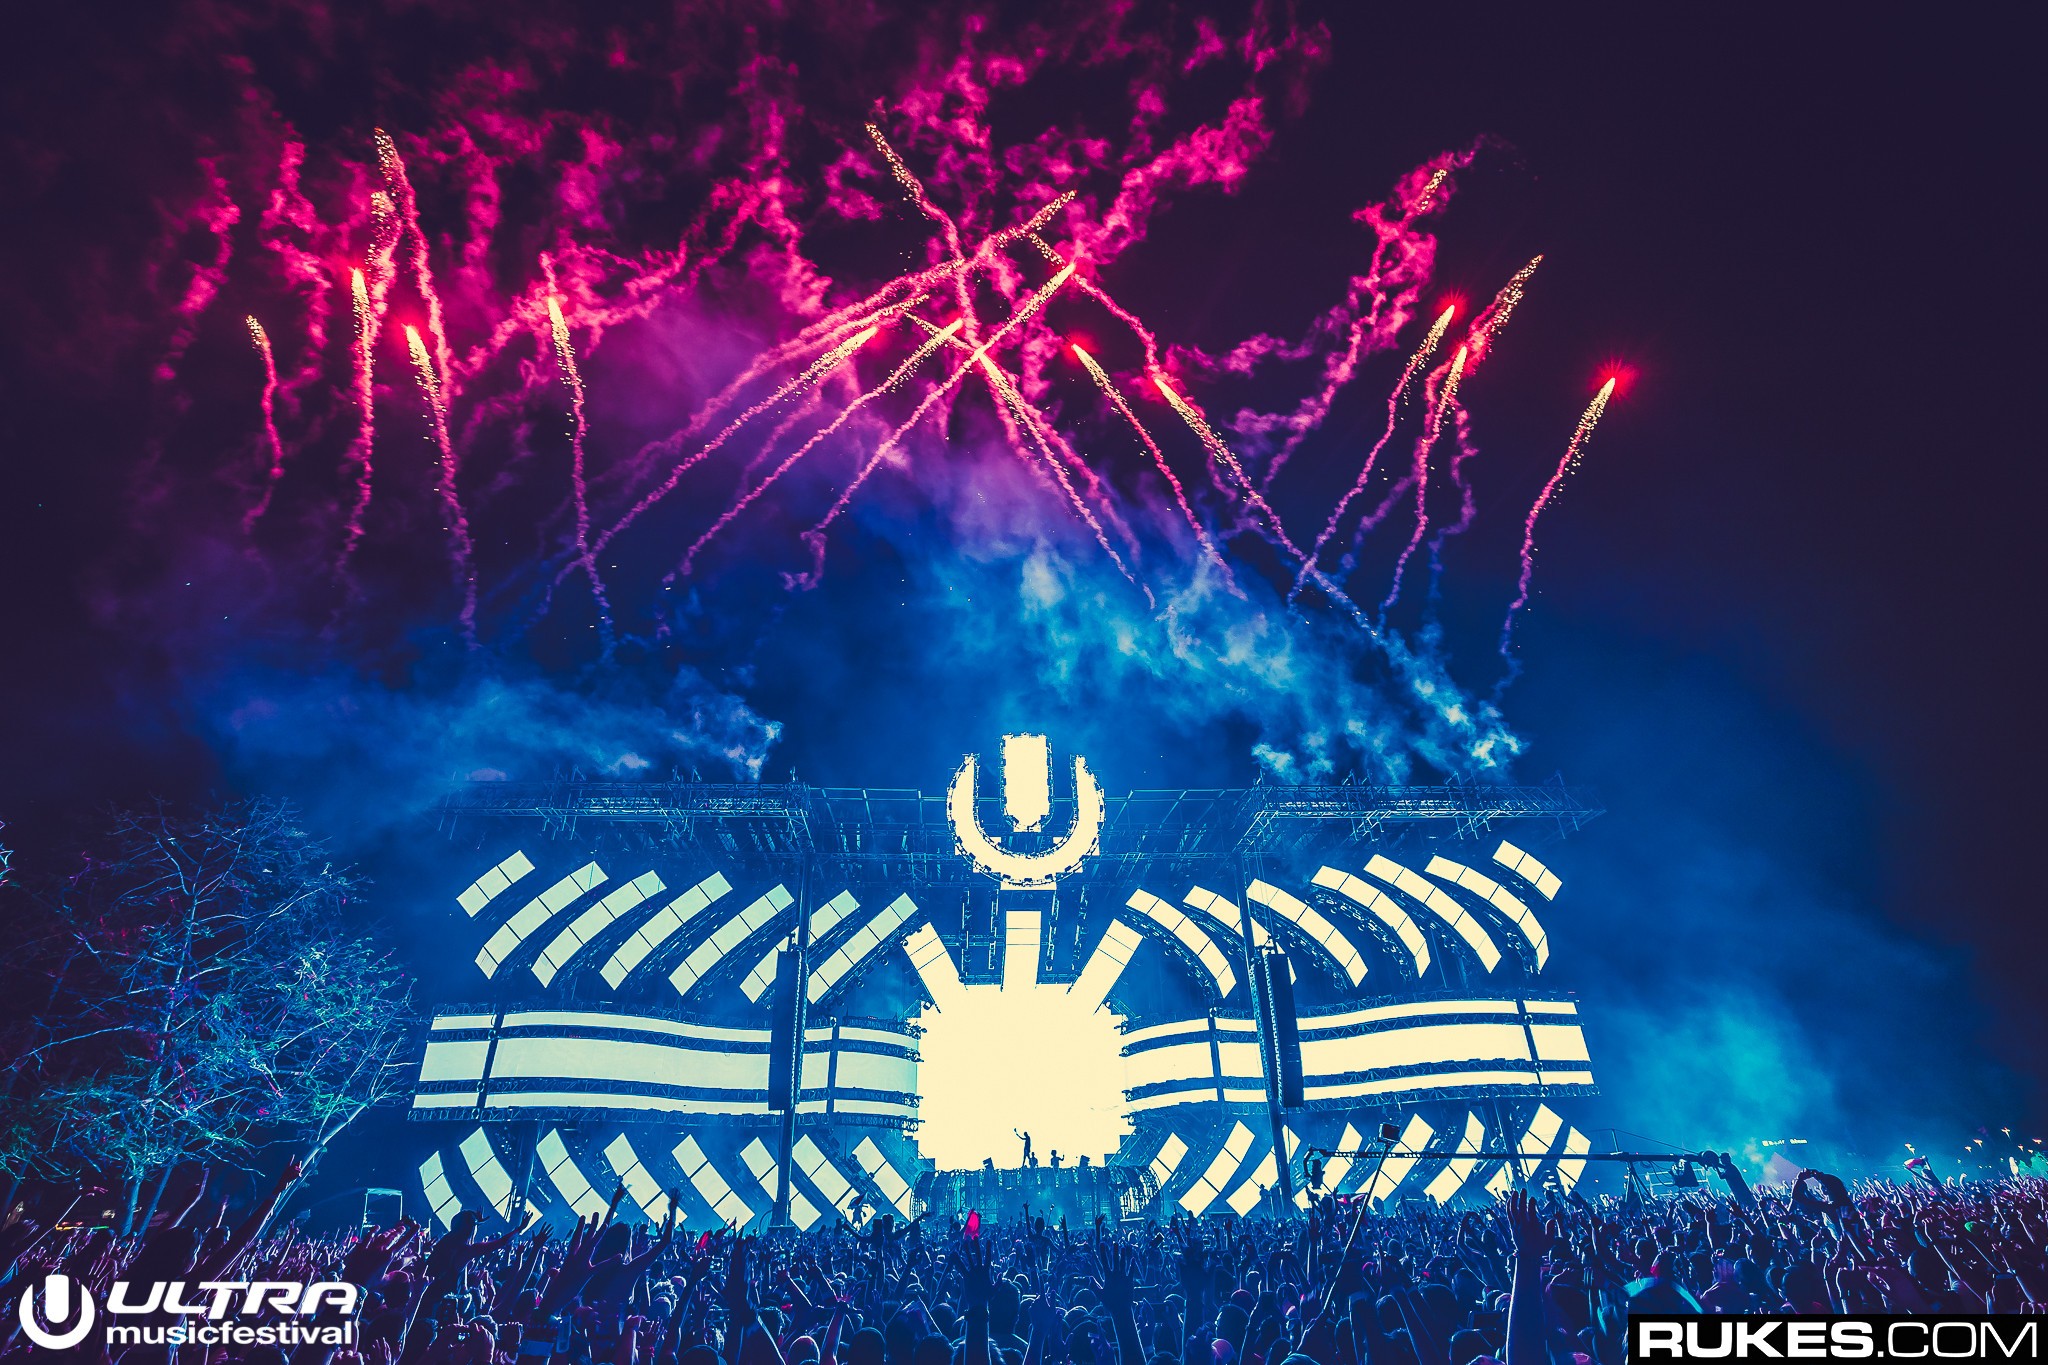 Ultra Music Festival Rukes Stages Lights Photography Fireworks Crowds Music 2048x1365